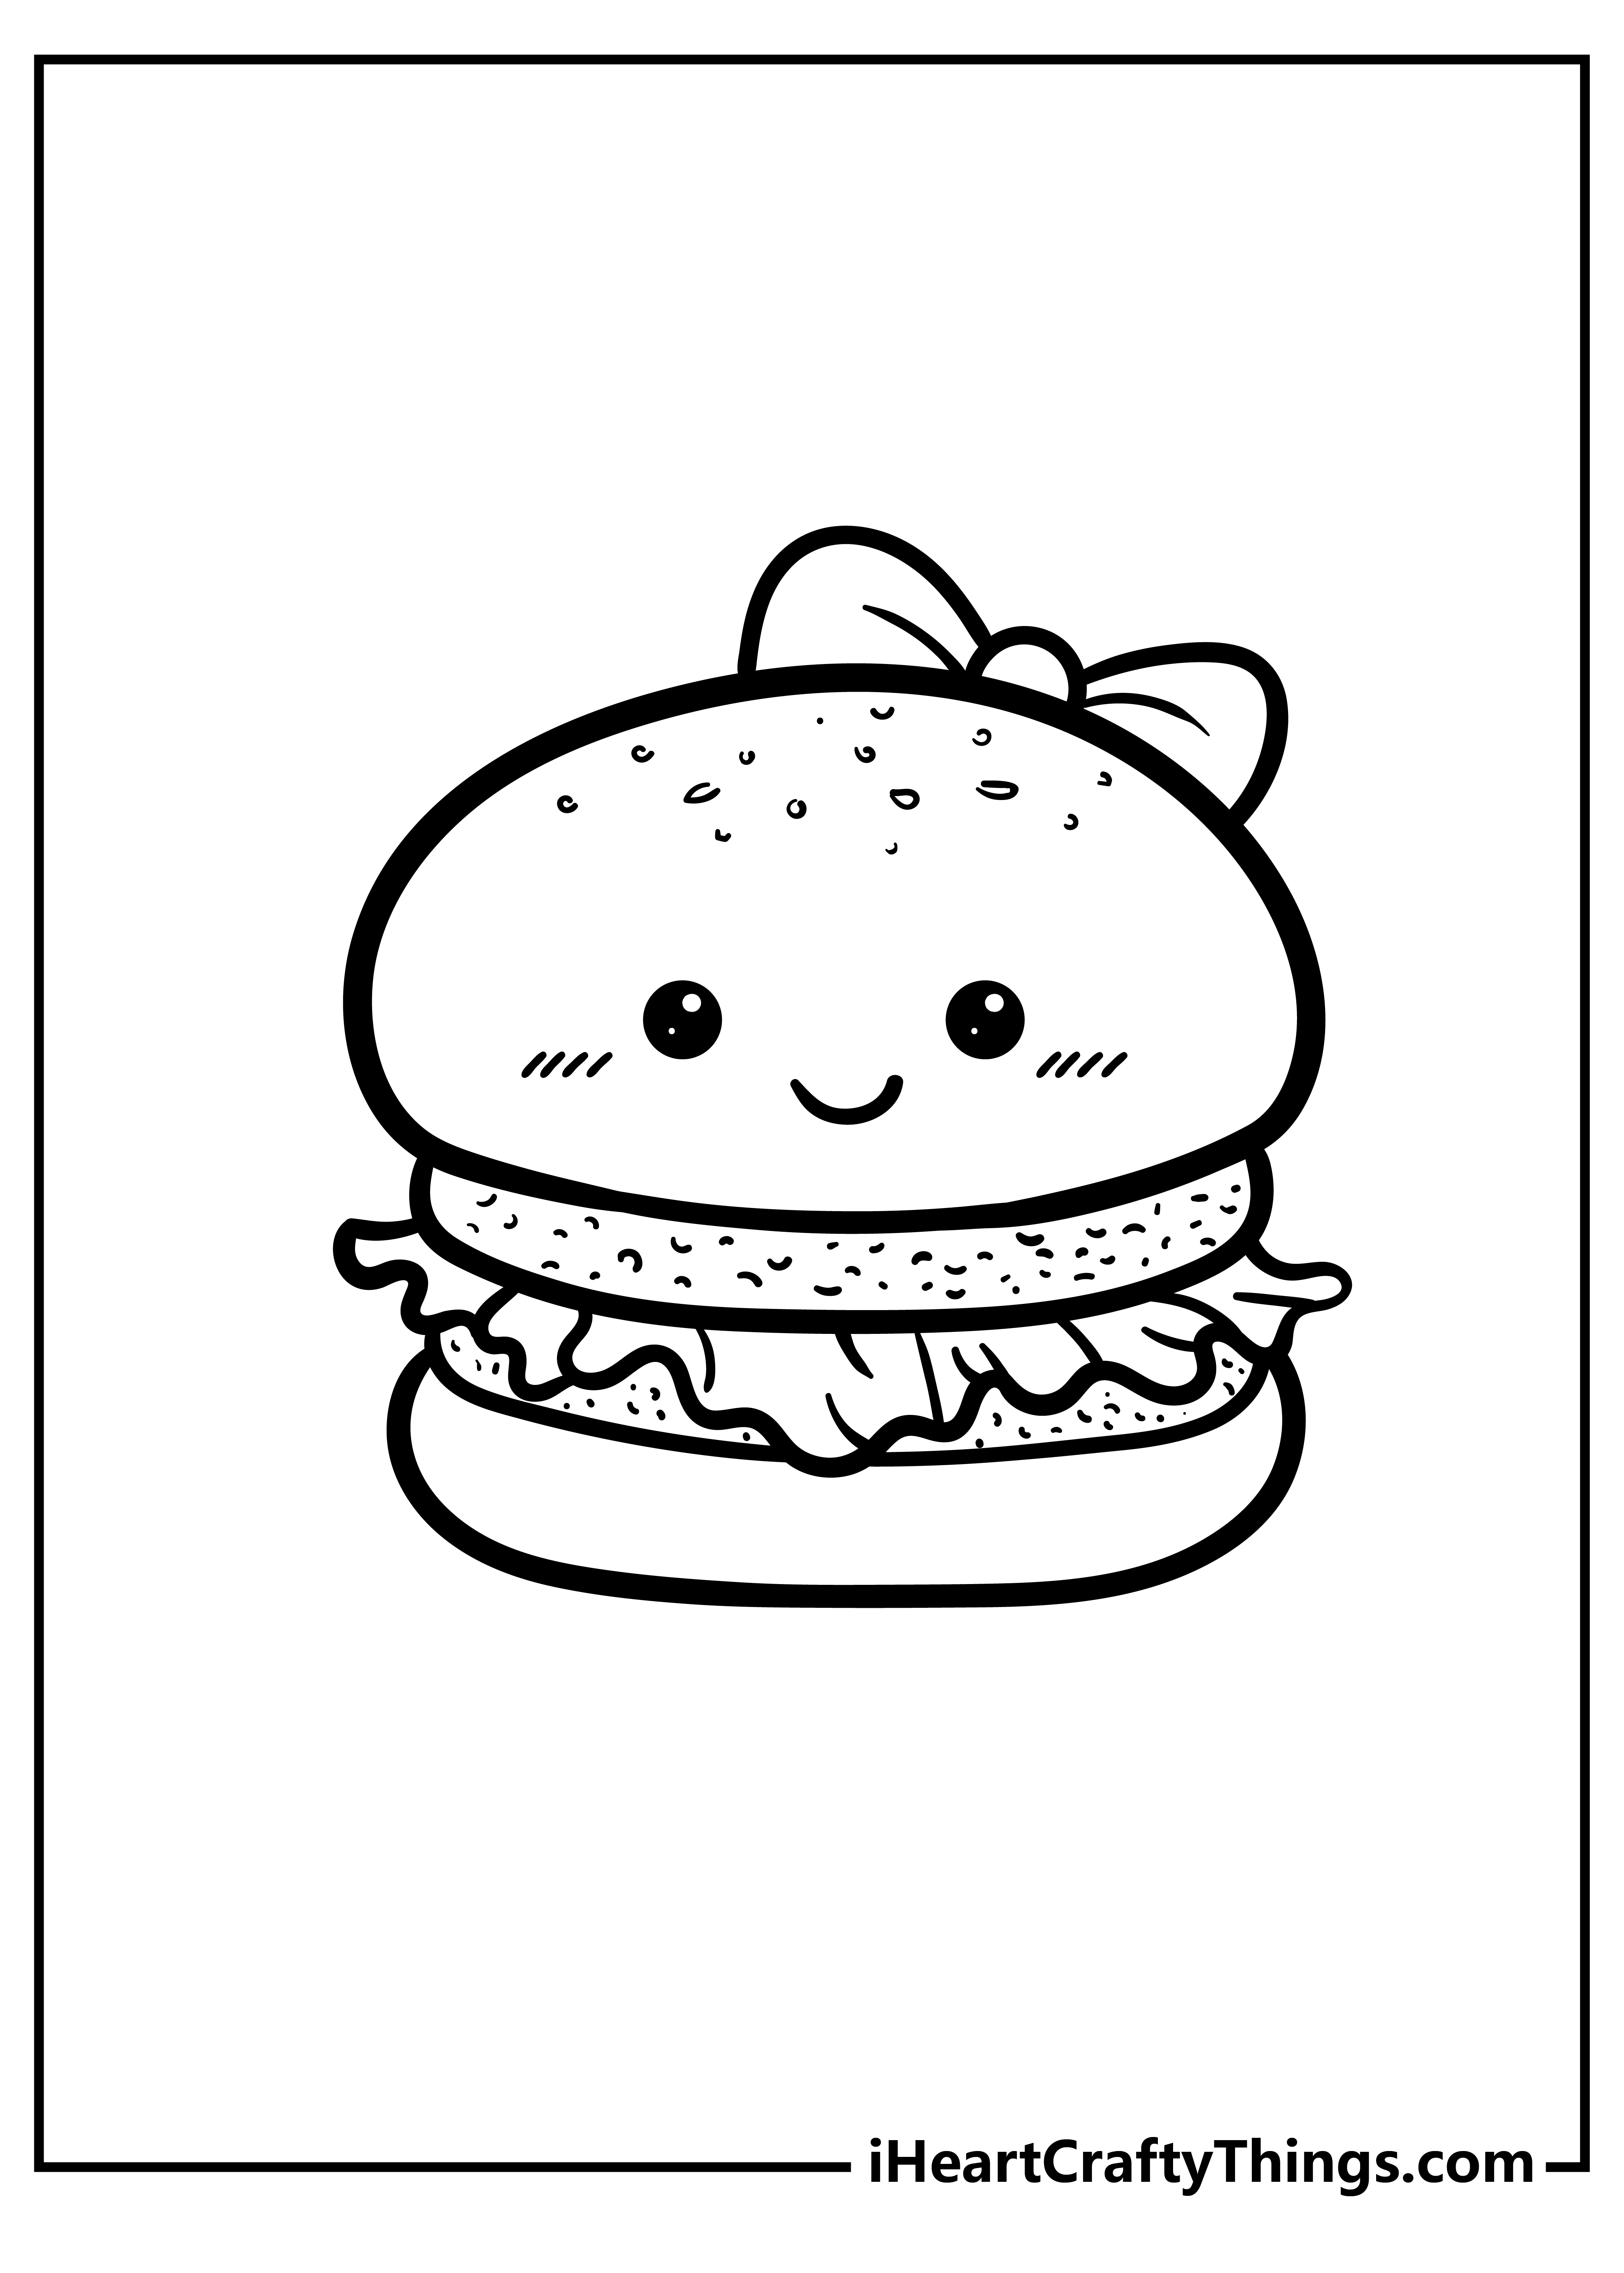 Cute Food Coloring Pages | Food coloring pages, Cute food, Food coloring